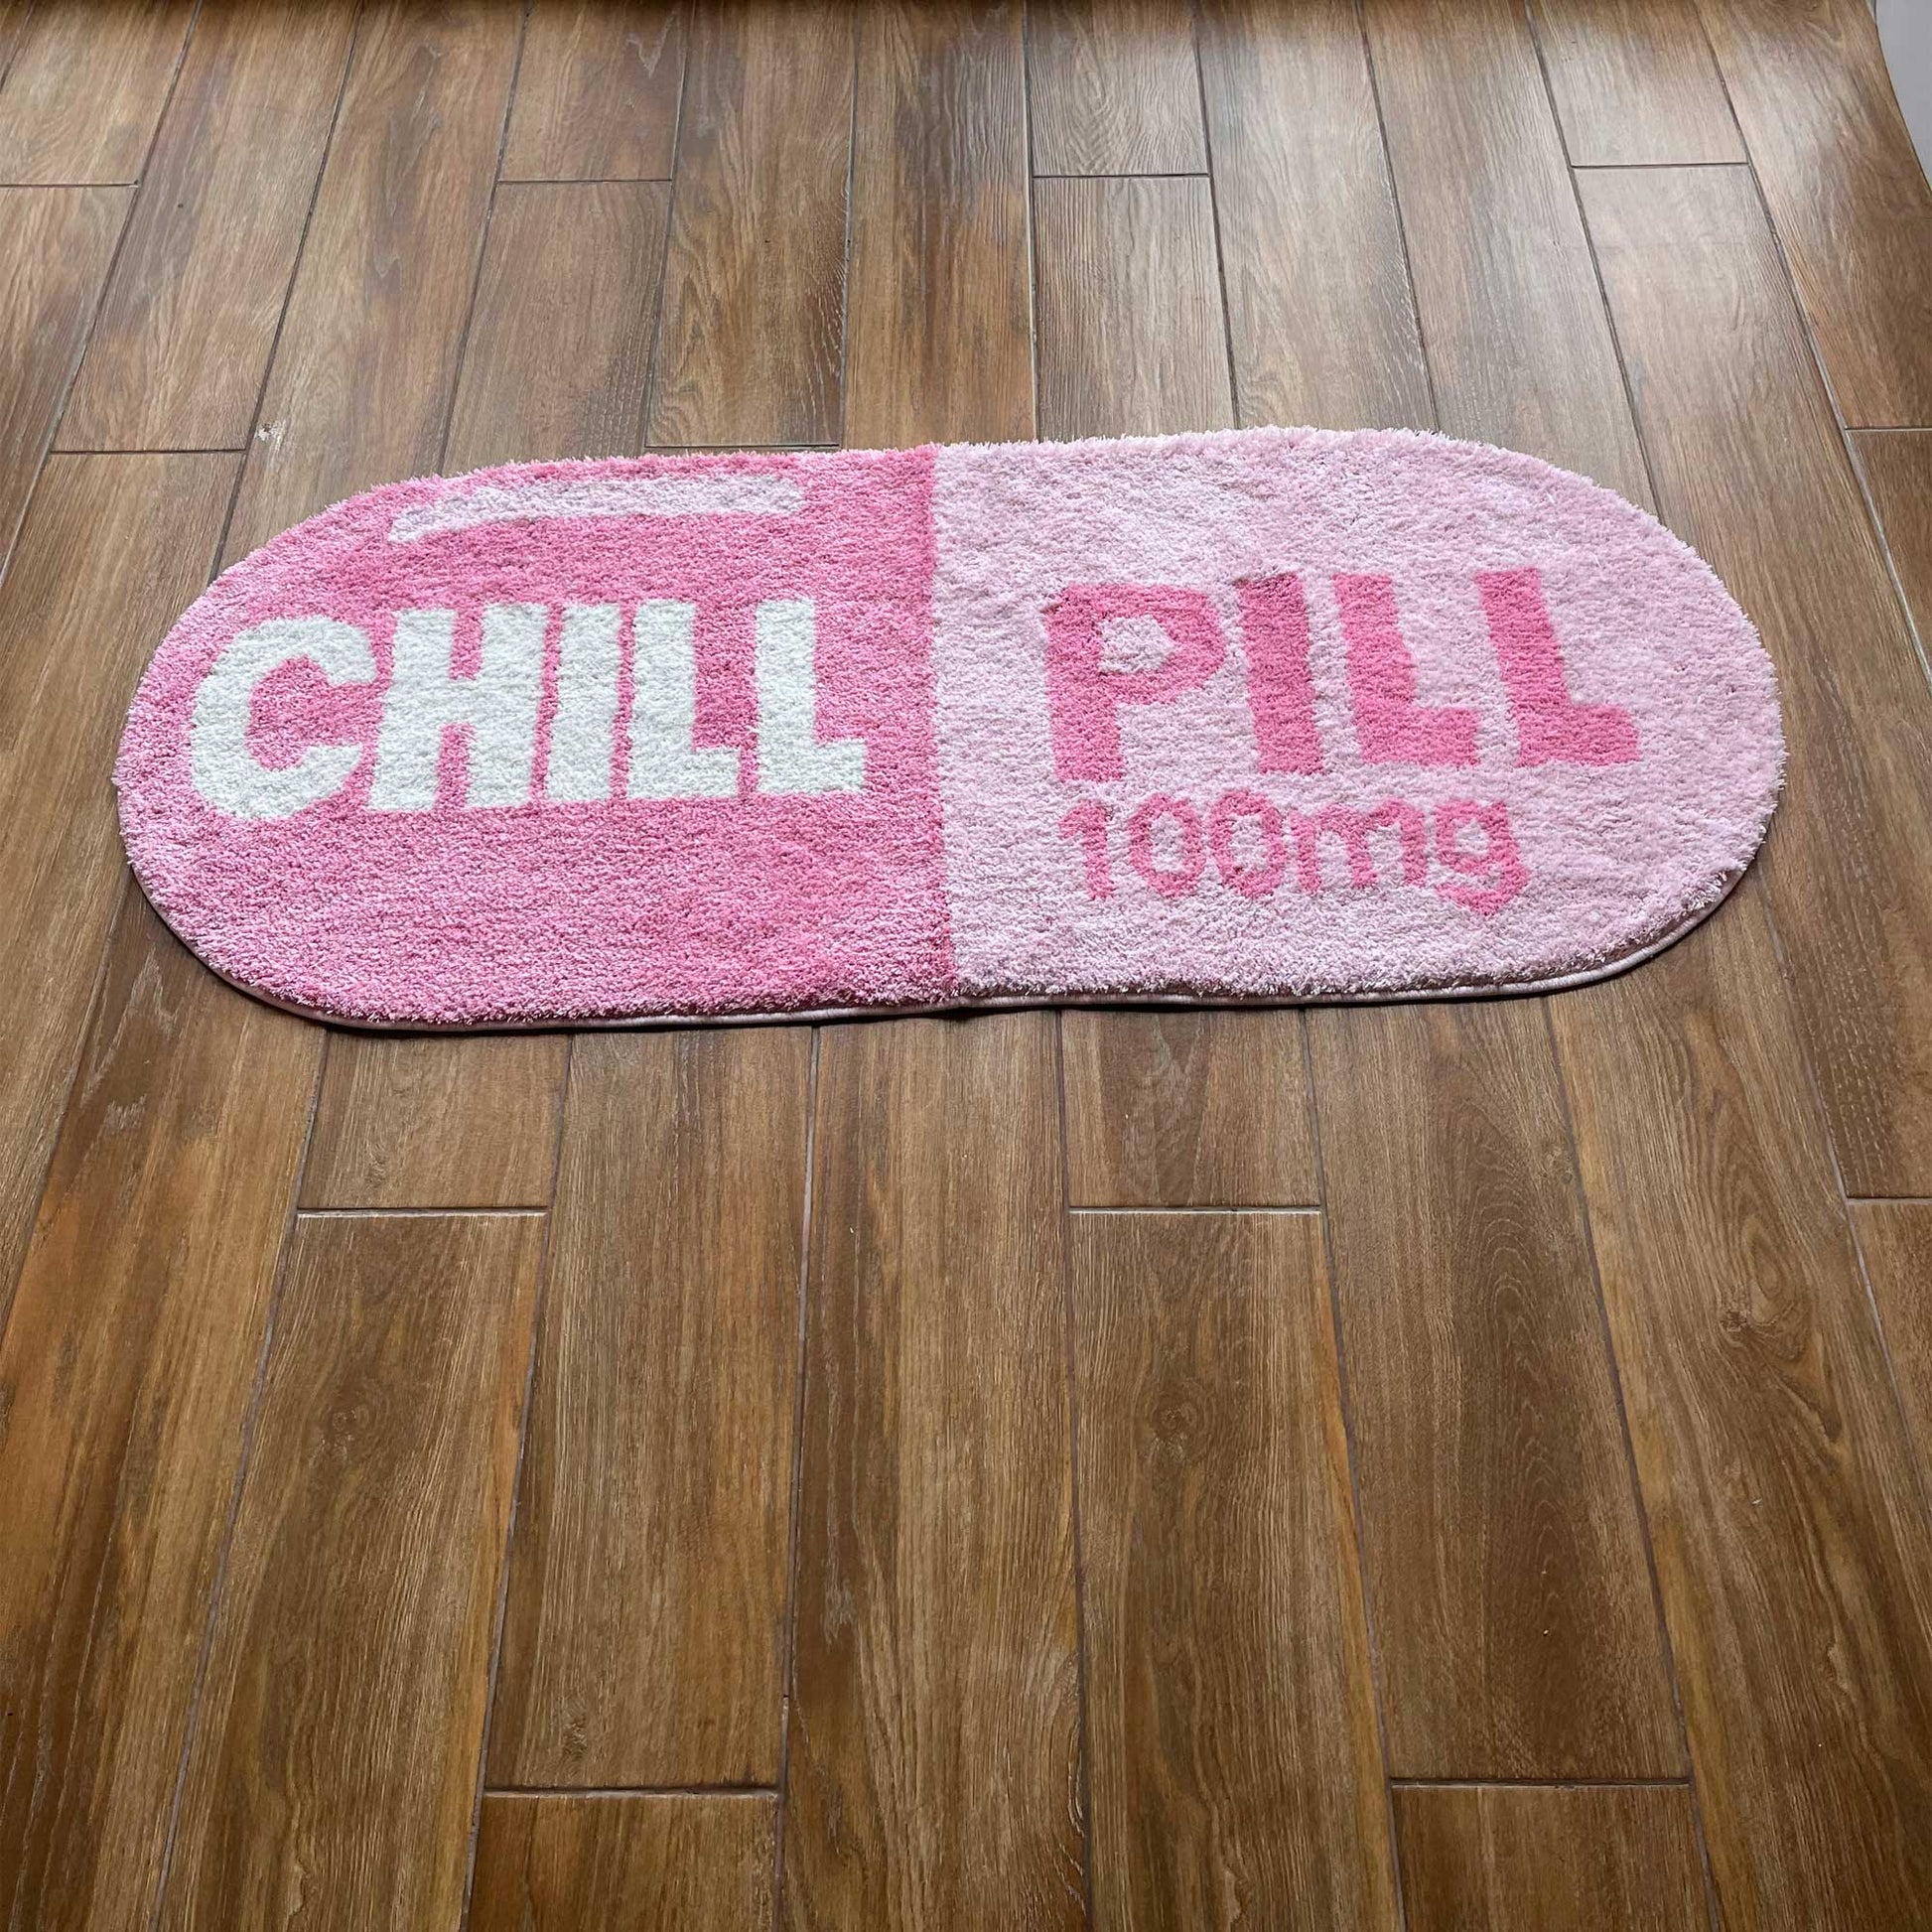 Tufted Rug Pink Chill Pill Rug Front Top Down